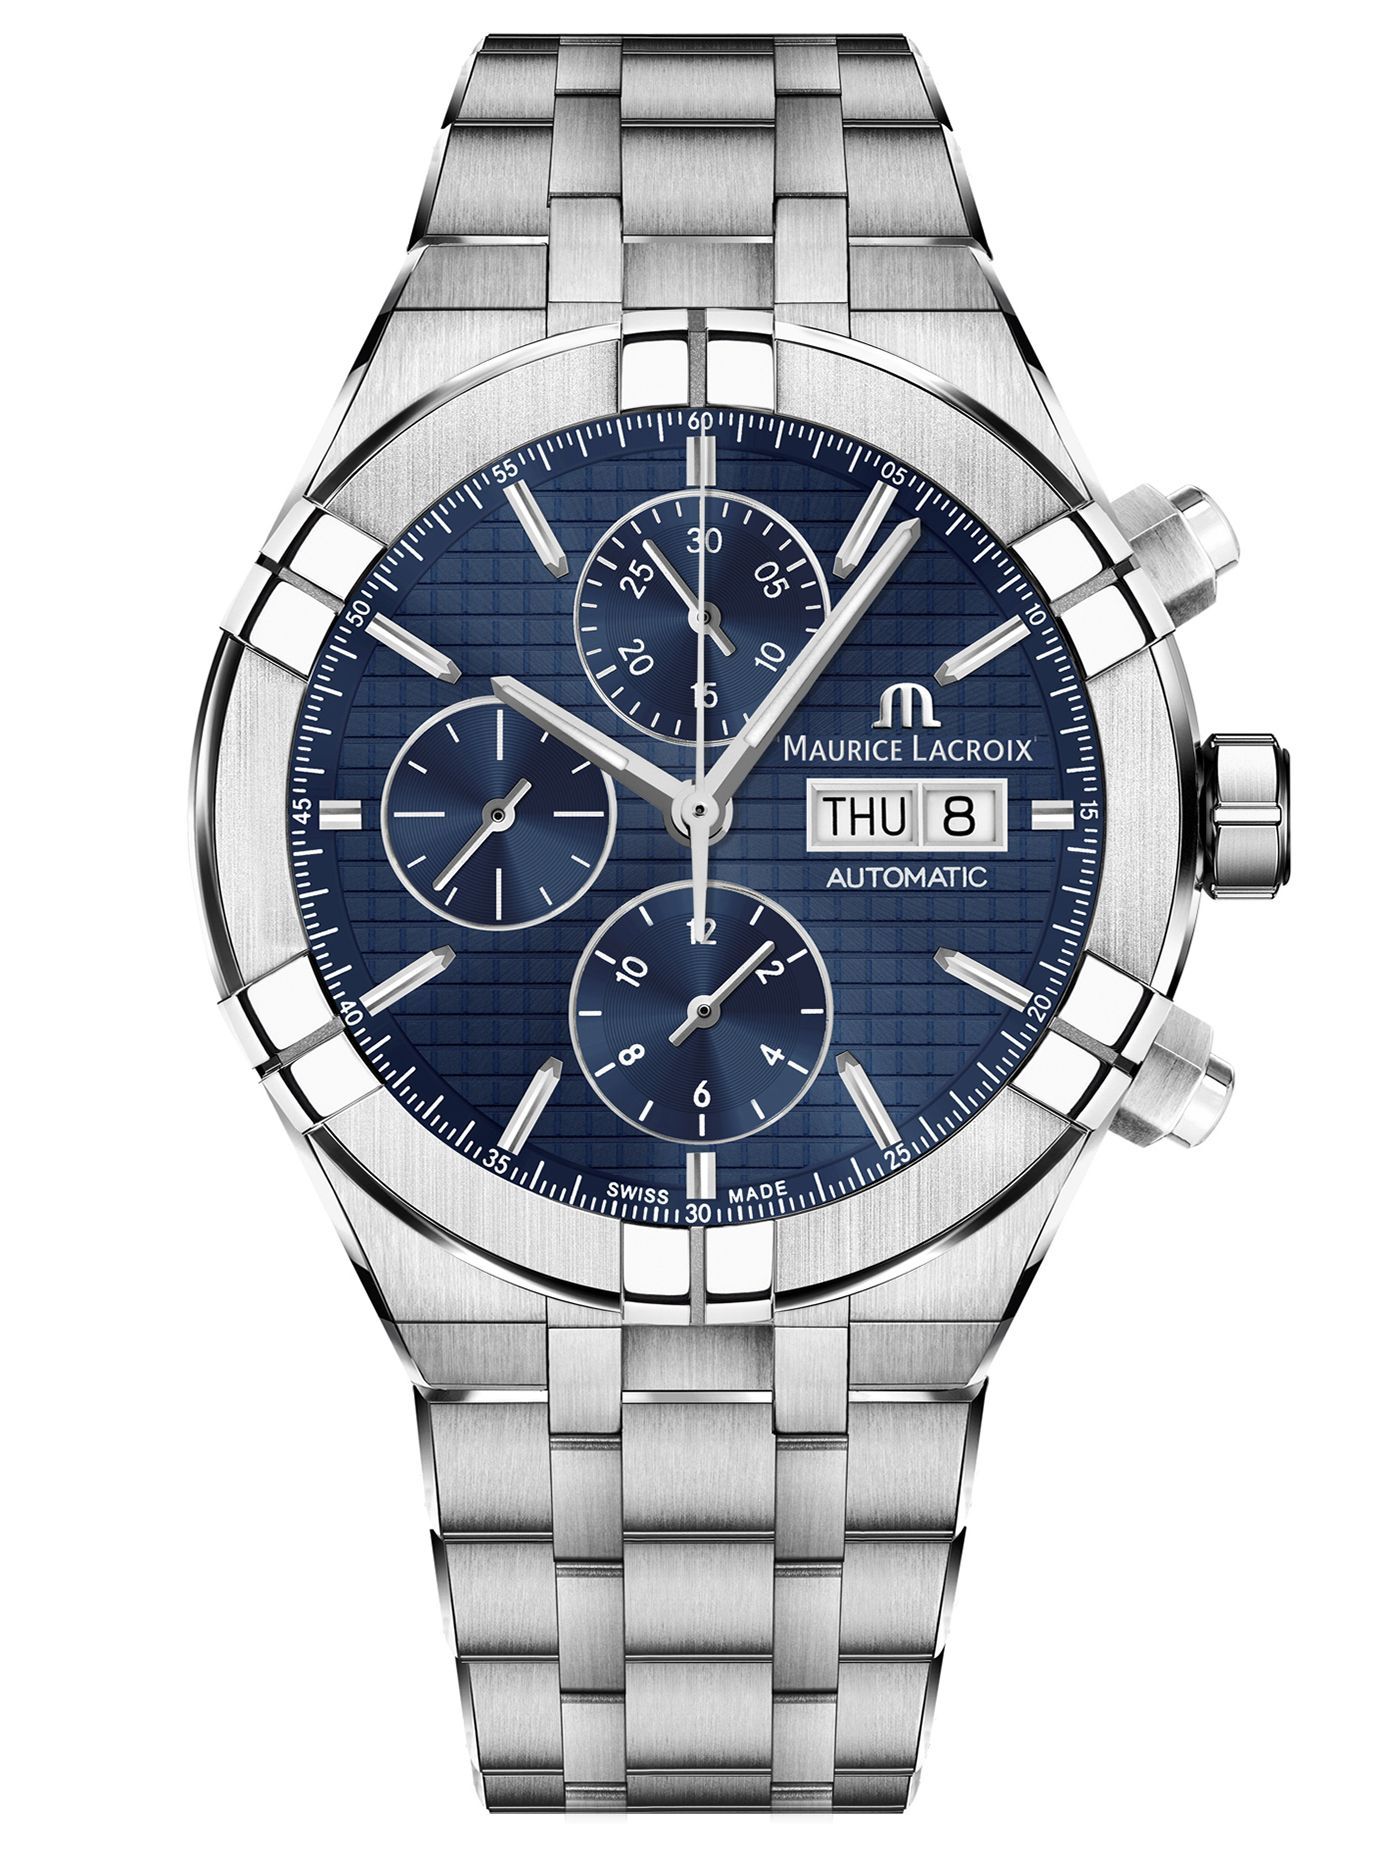 Maurice Lacroix AIKON Automatic Chronograph 44mm Mens Watch